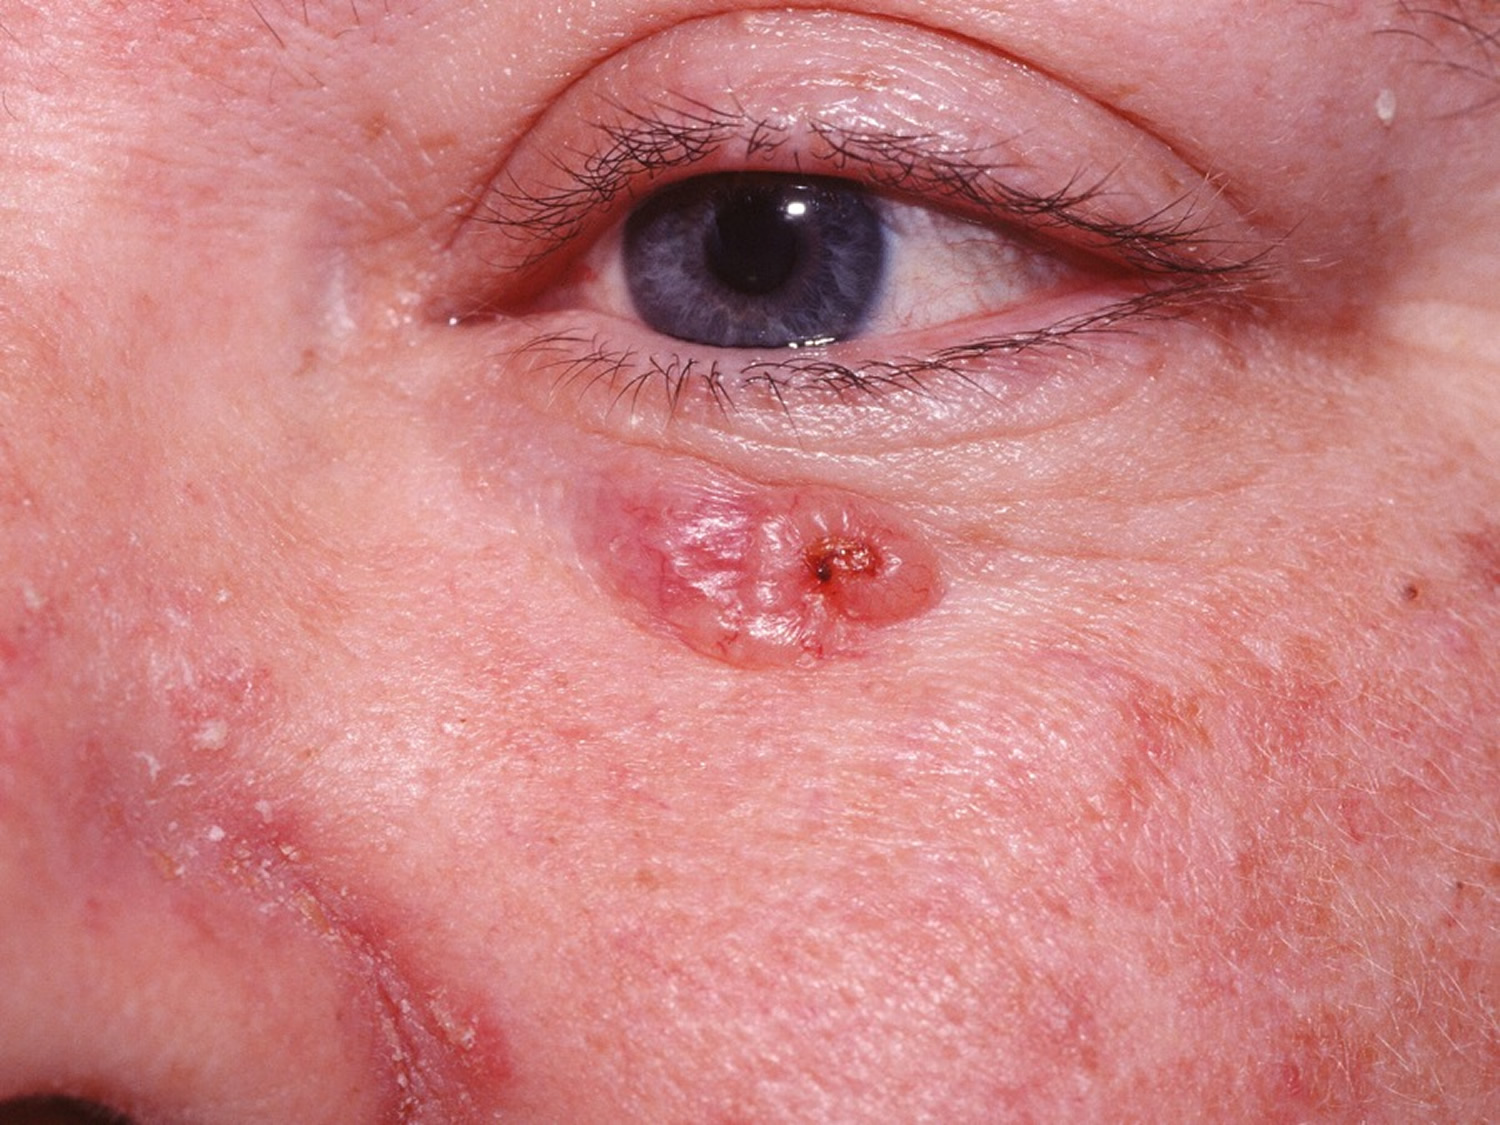 Basal Cell Carcinoma Causes Types Symptoms Prognosis Treatment